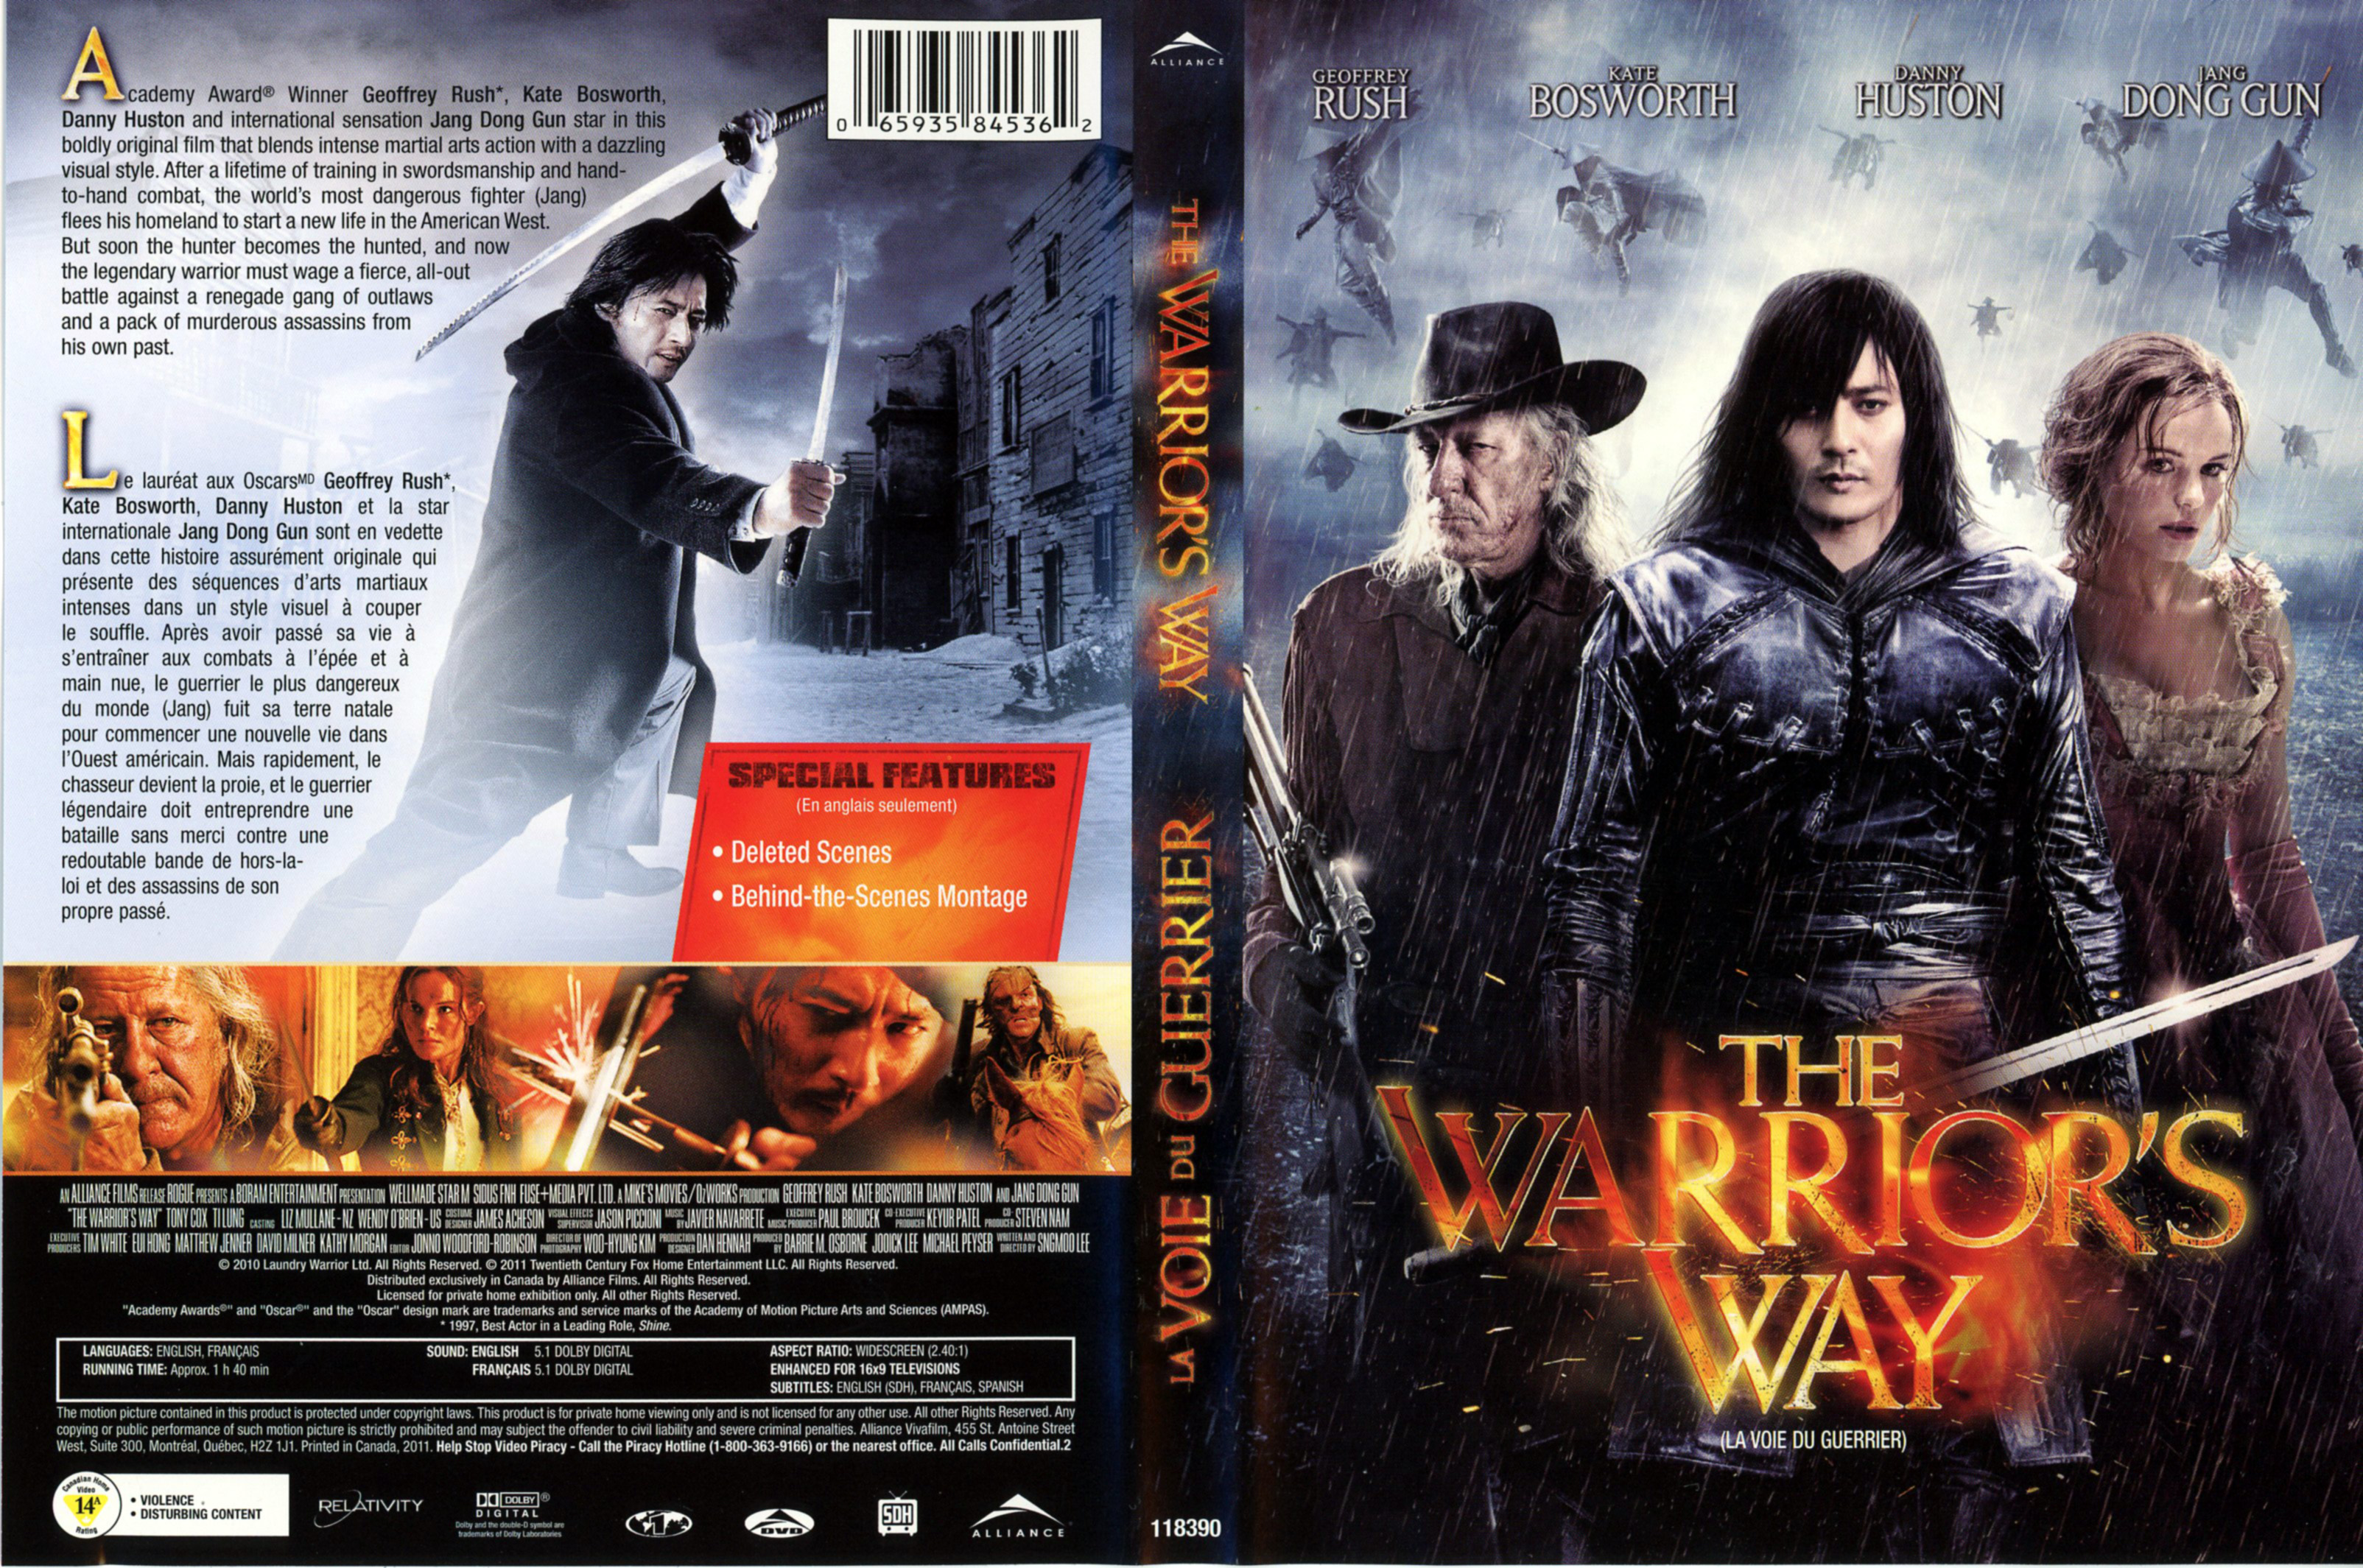 Jaquette DVD The Warrior